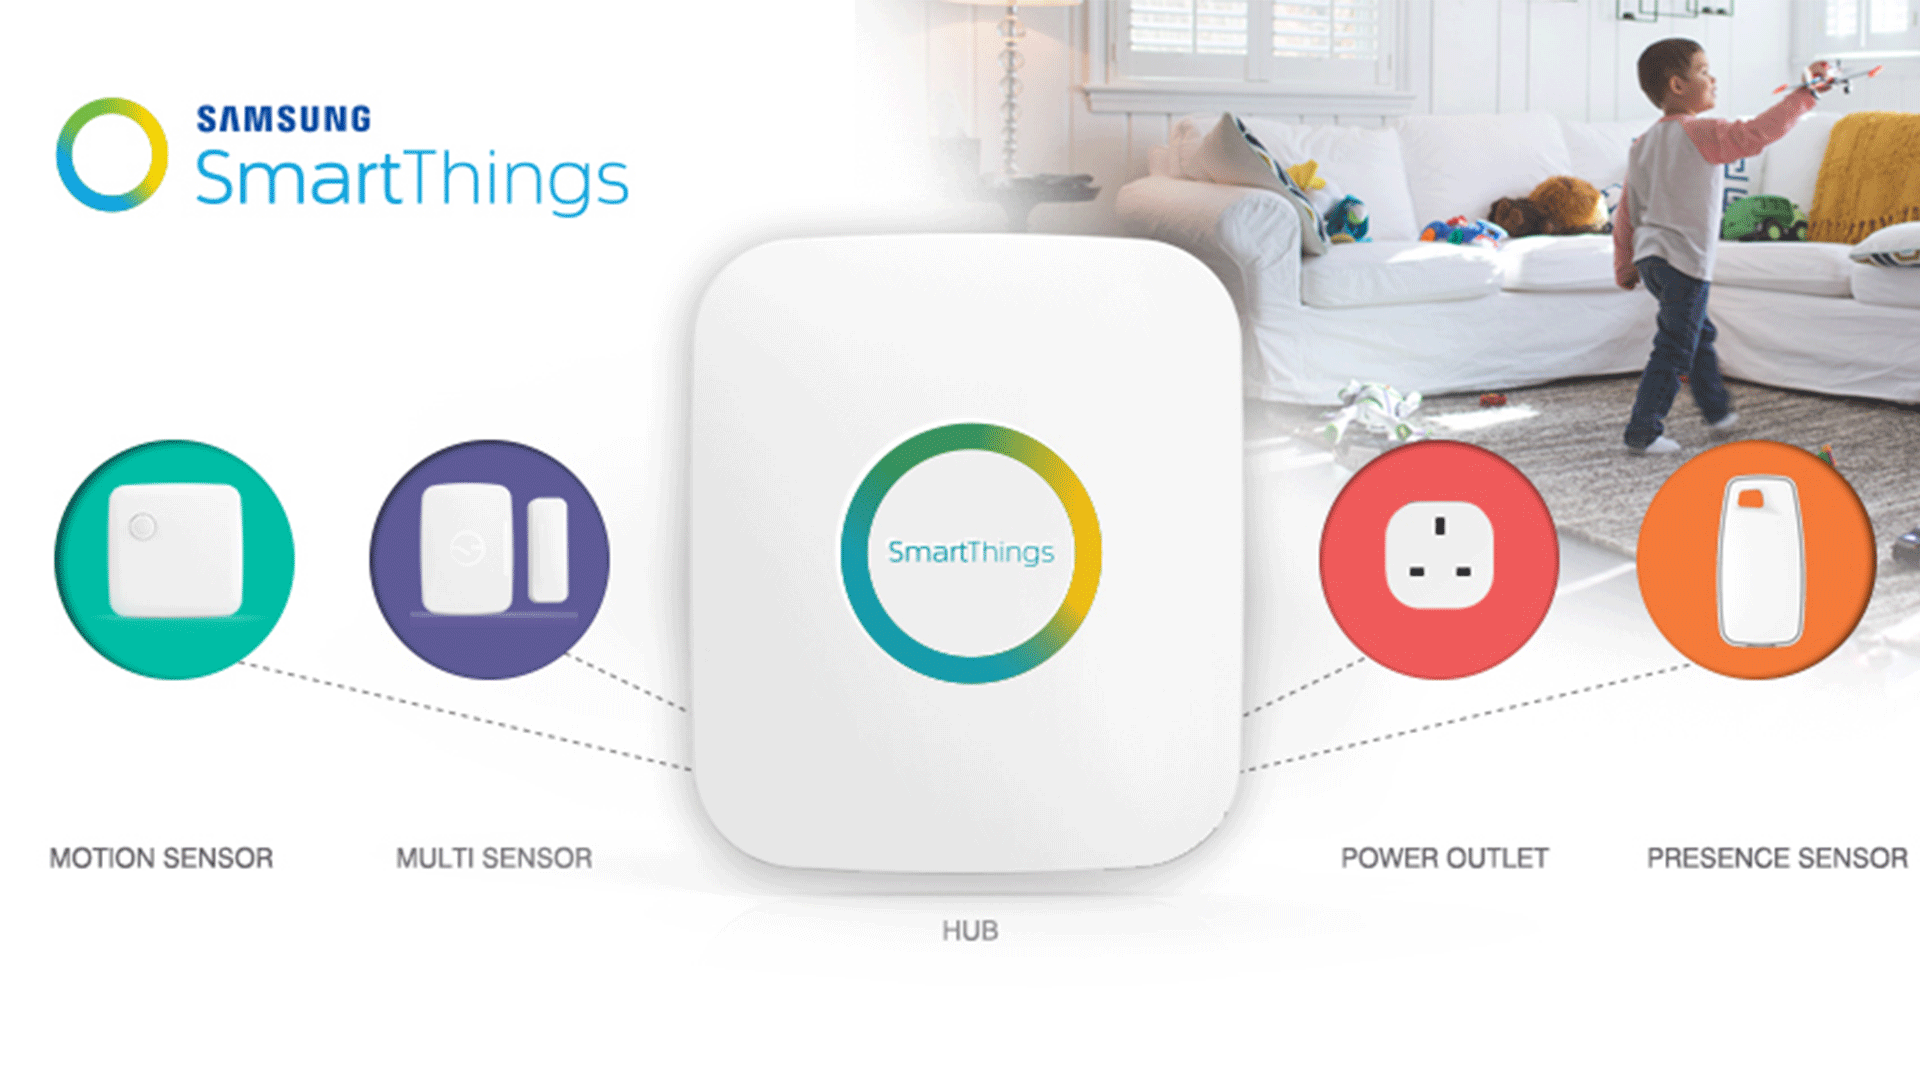 smat-home-samsung-smart-things